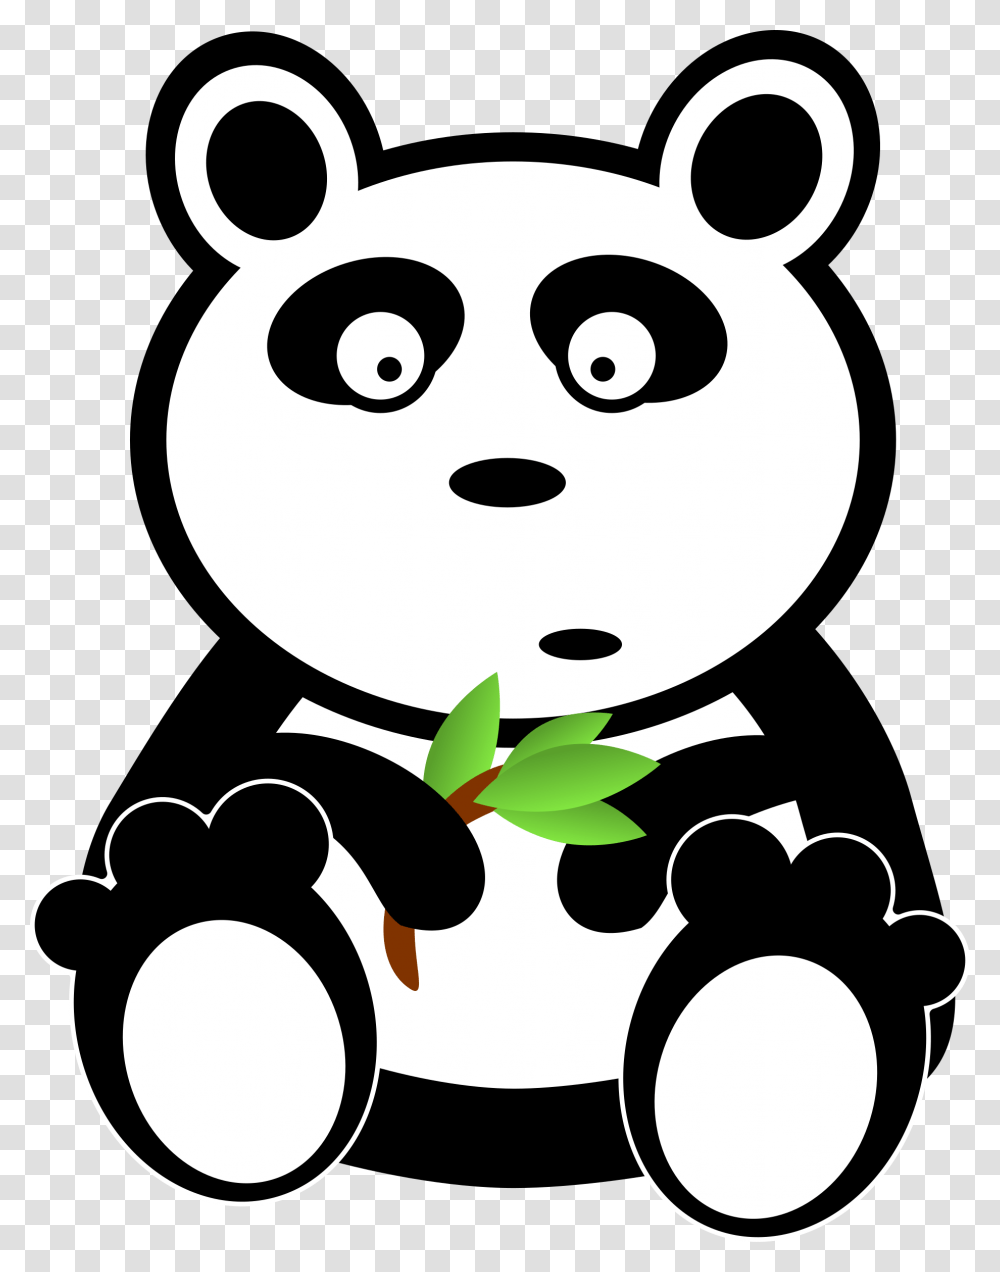 Panda With Bamboo Leaves Icons, Stencil Transparent Png